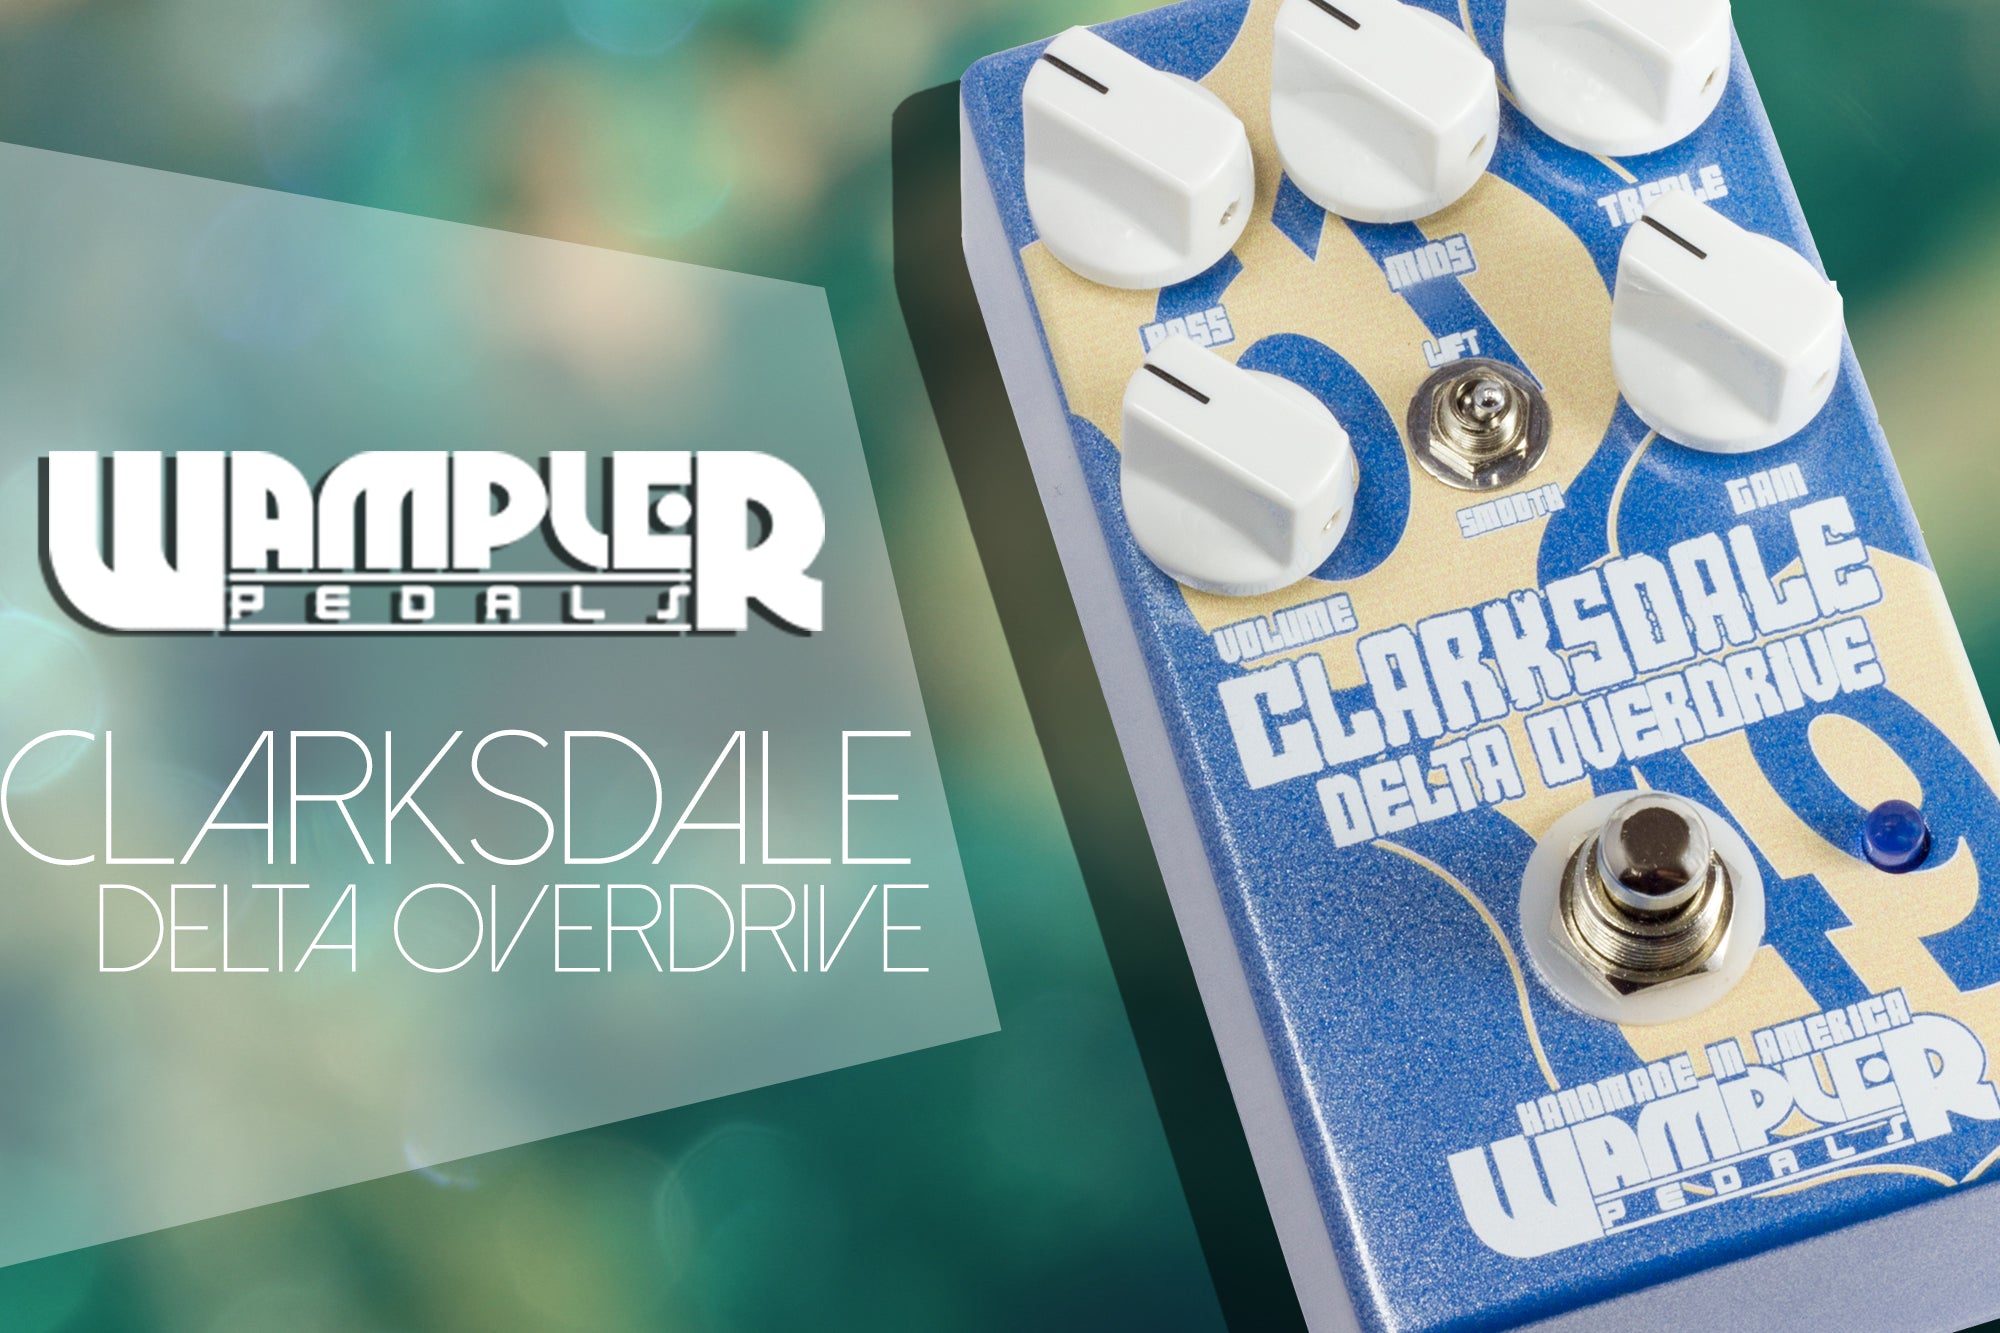 The Wampler Clarksdale Delta Overdrive Pedal | The Music Zoo